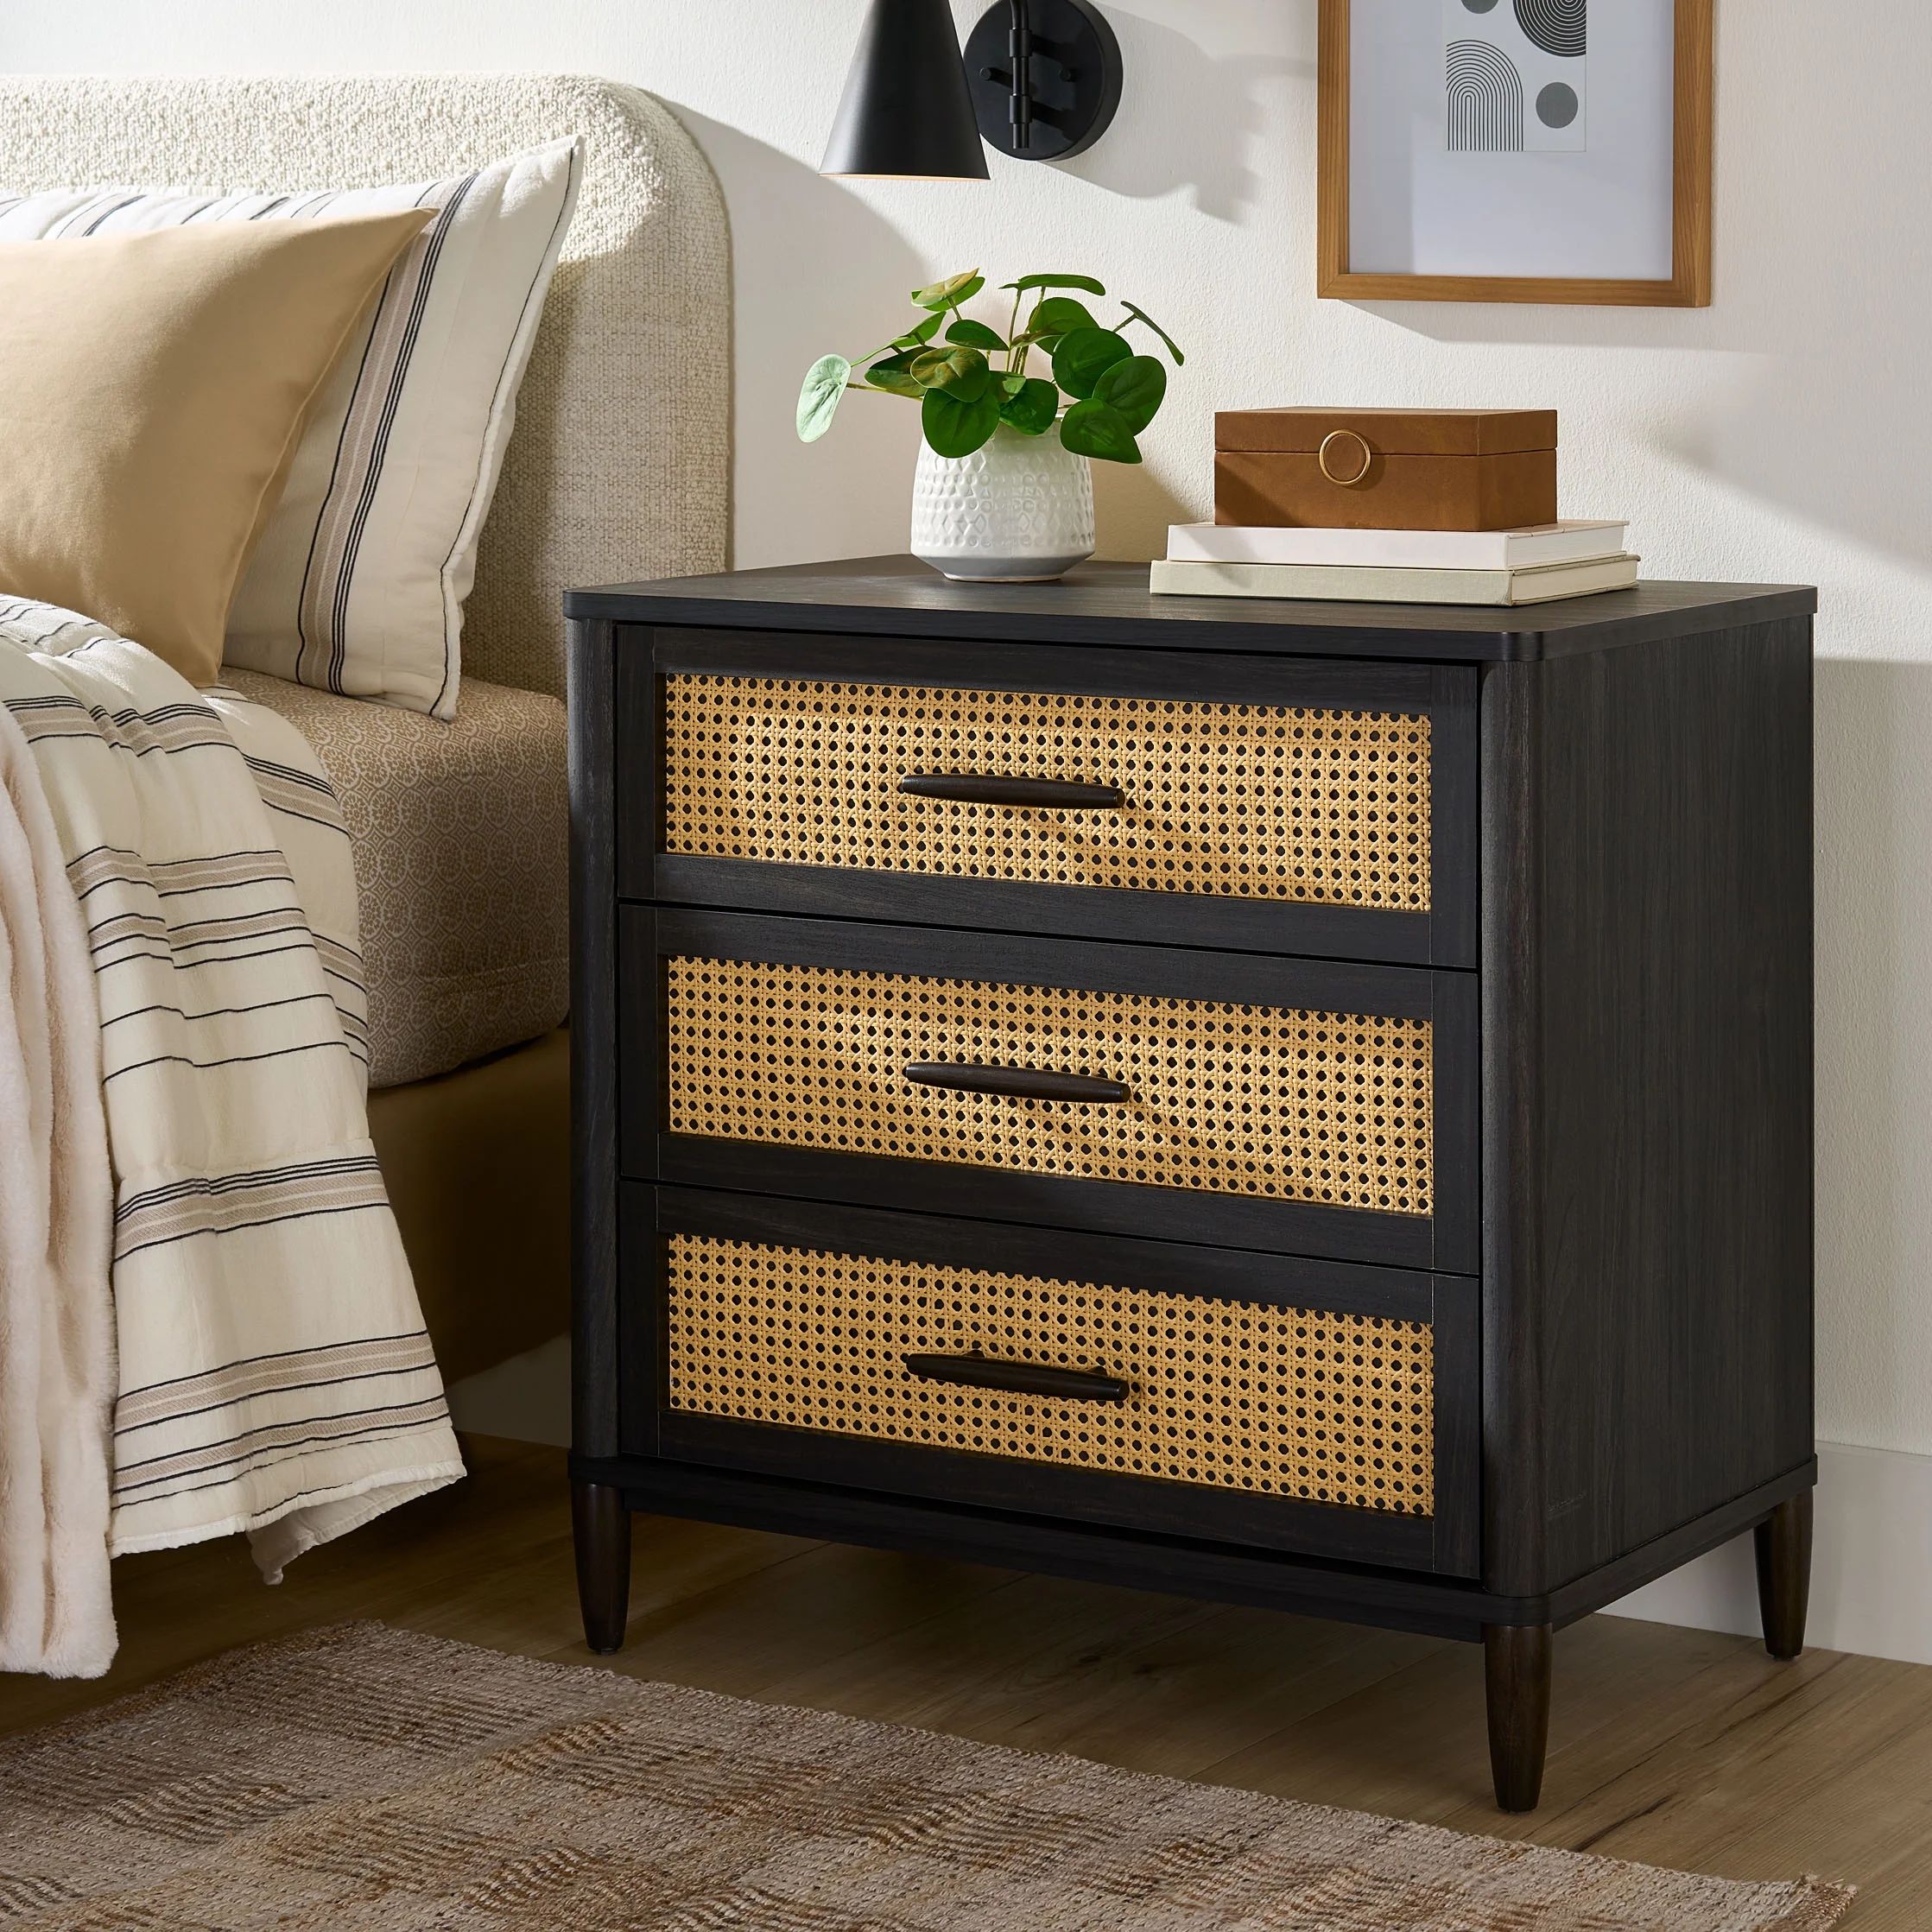 Better Homes & Gardens Springwood Caning 3-Drawer Chest with USB, Charcoal finish: | Walmart (US)